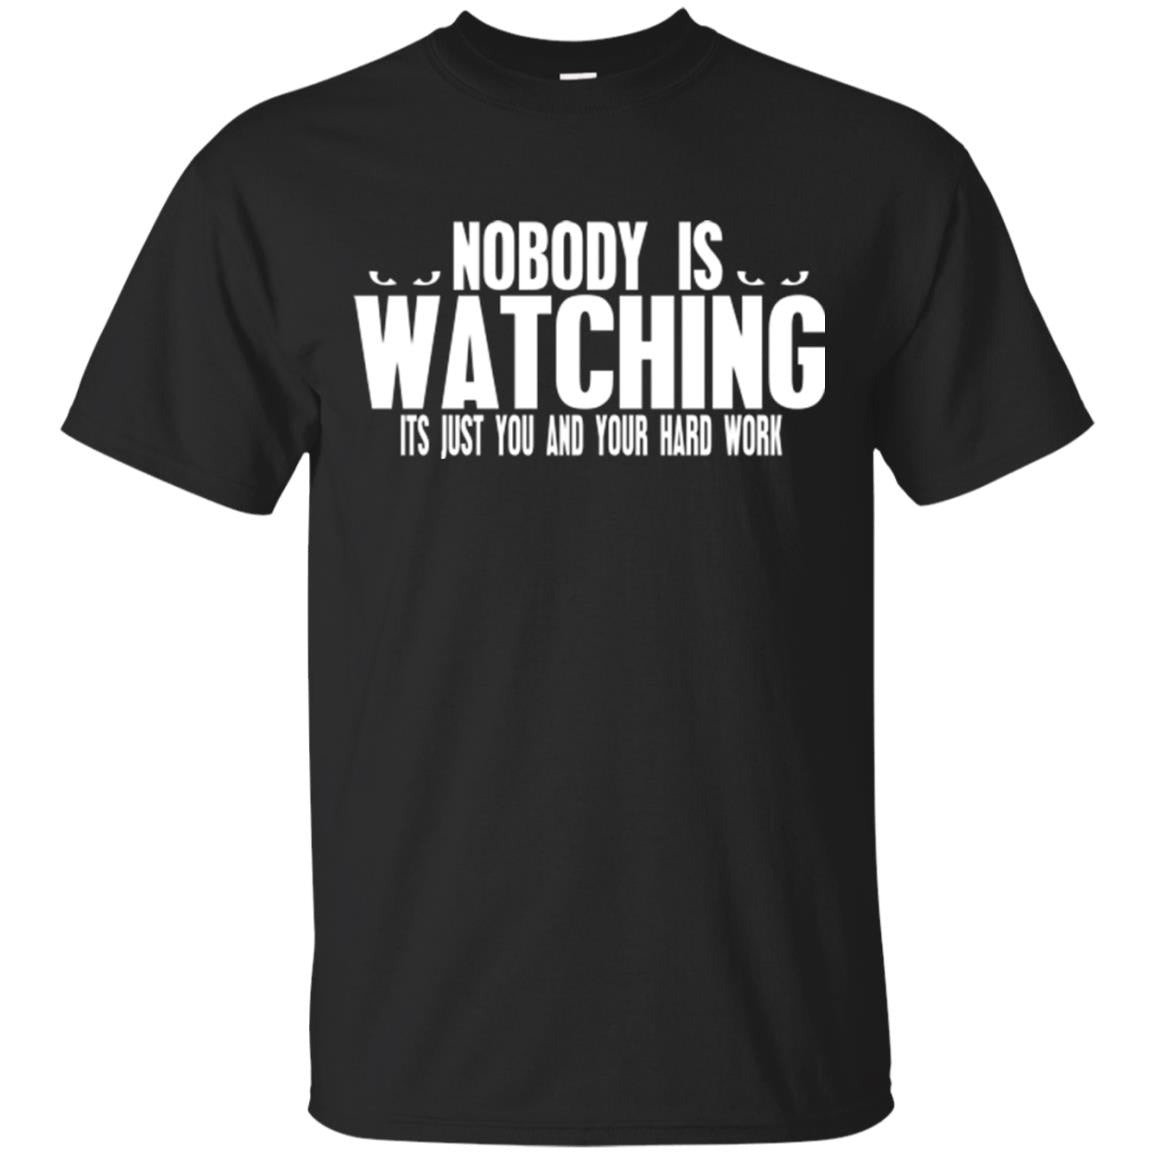 NOBODY IS WATCHING